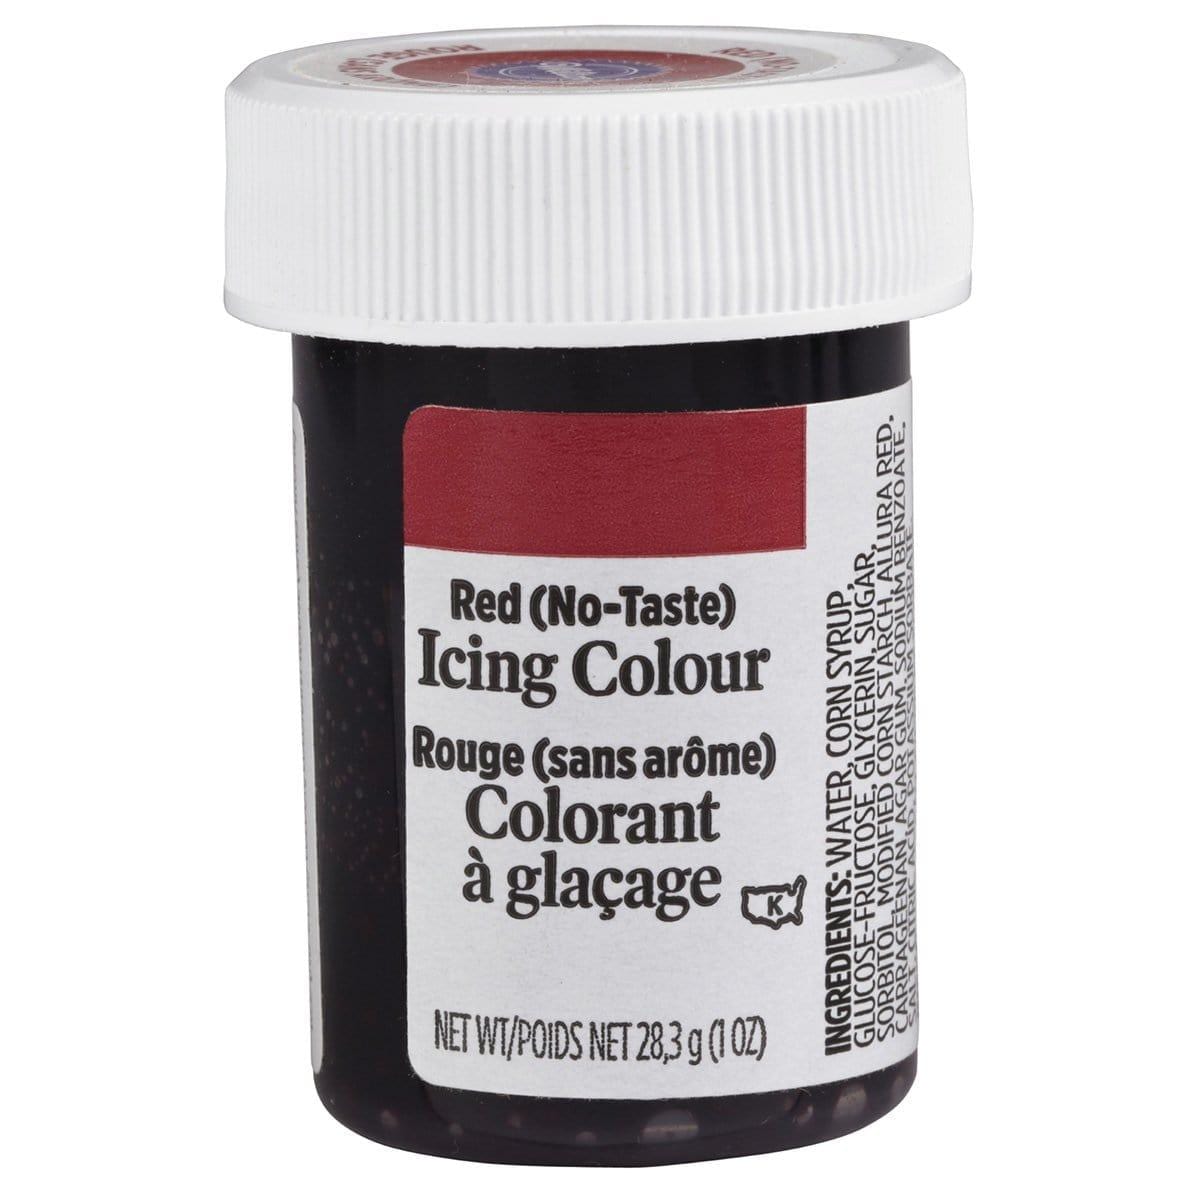 Buy Cake Supplies Icing Color - Red 1 oz sold at Party Expert